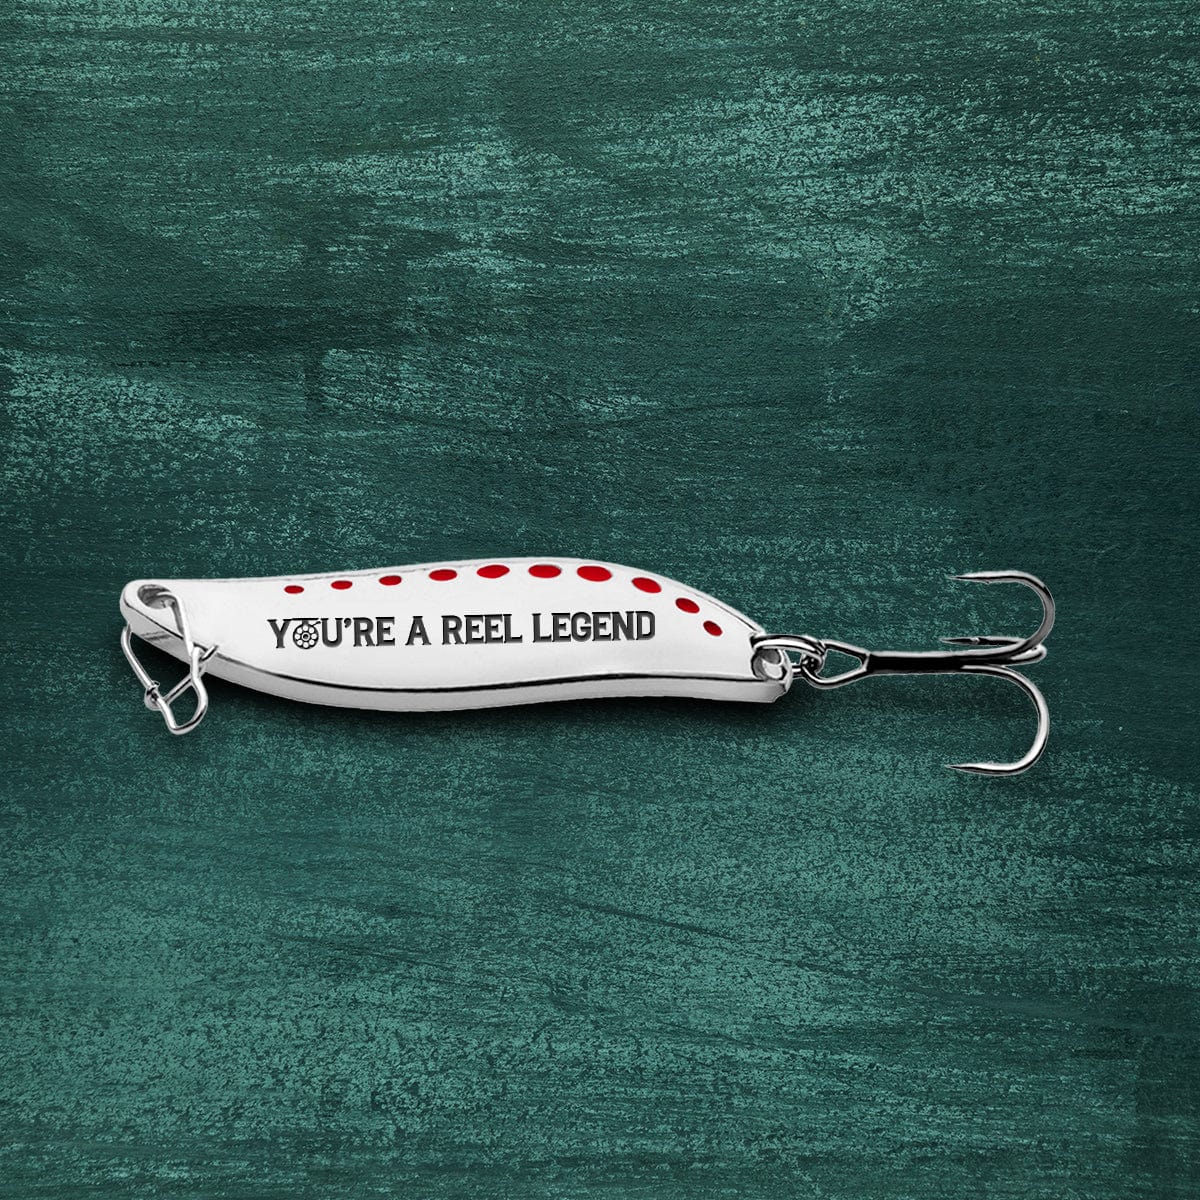 Fishing Lures - Fishing - To My Dad - You're A Reel Legend - Gfaa18005 -  Wrapsify